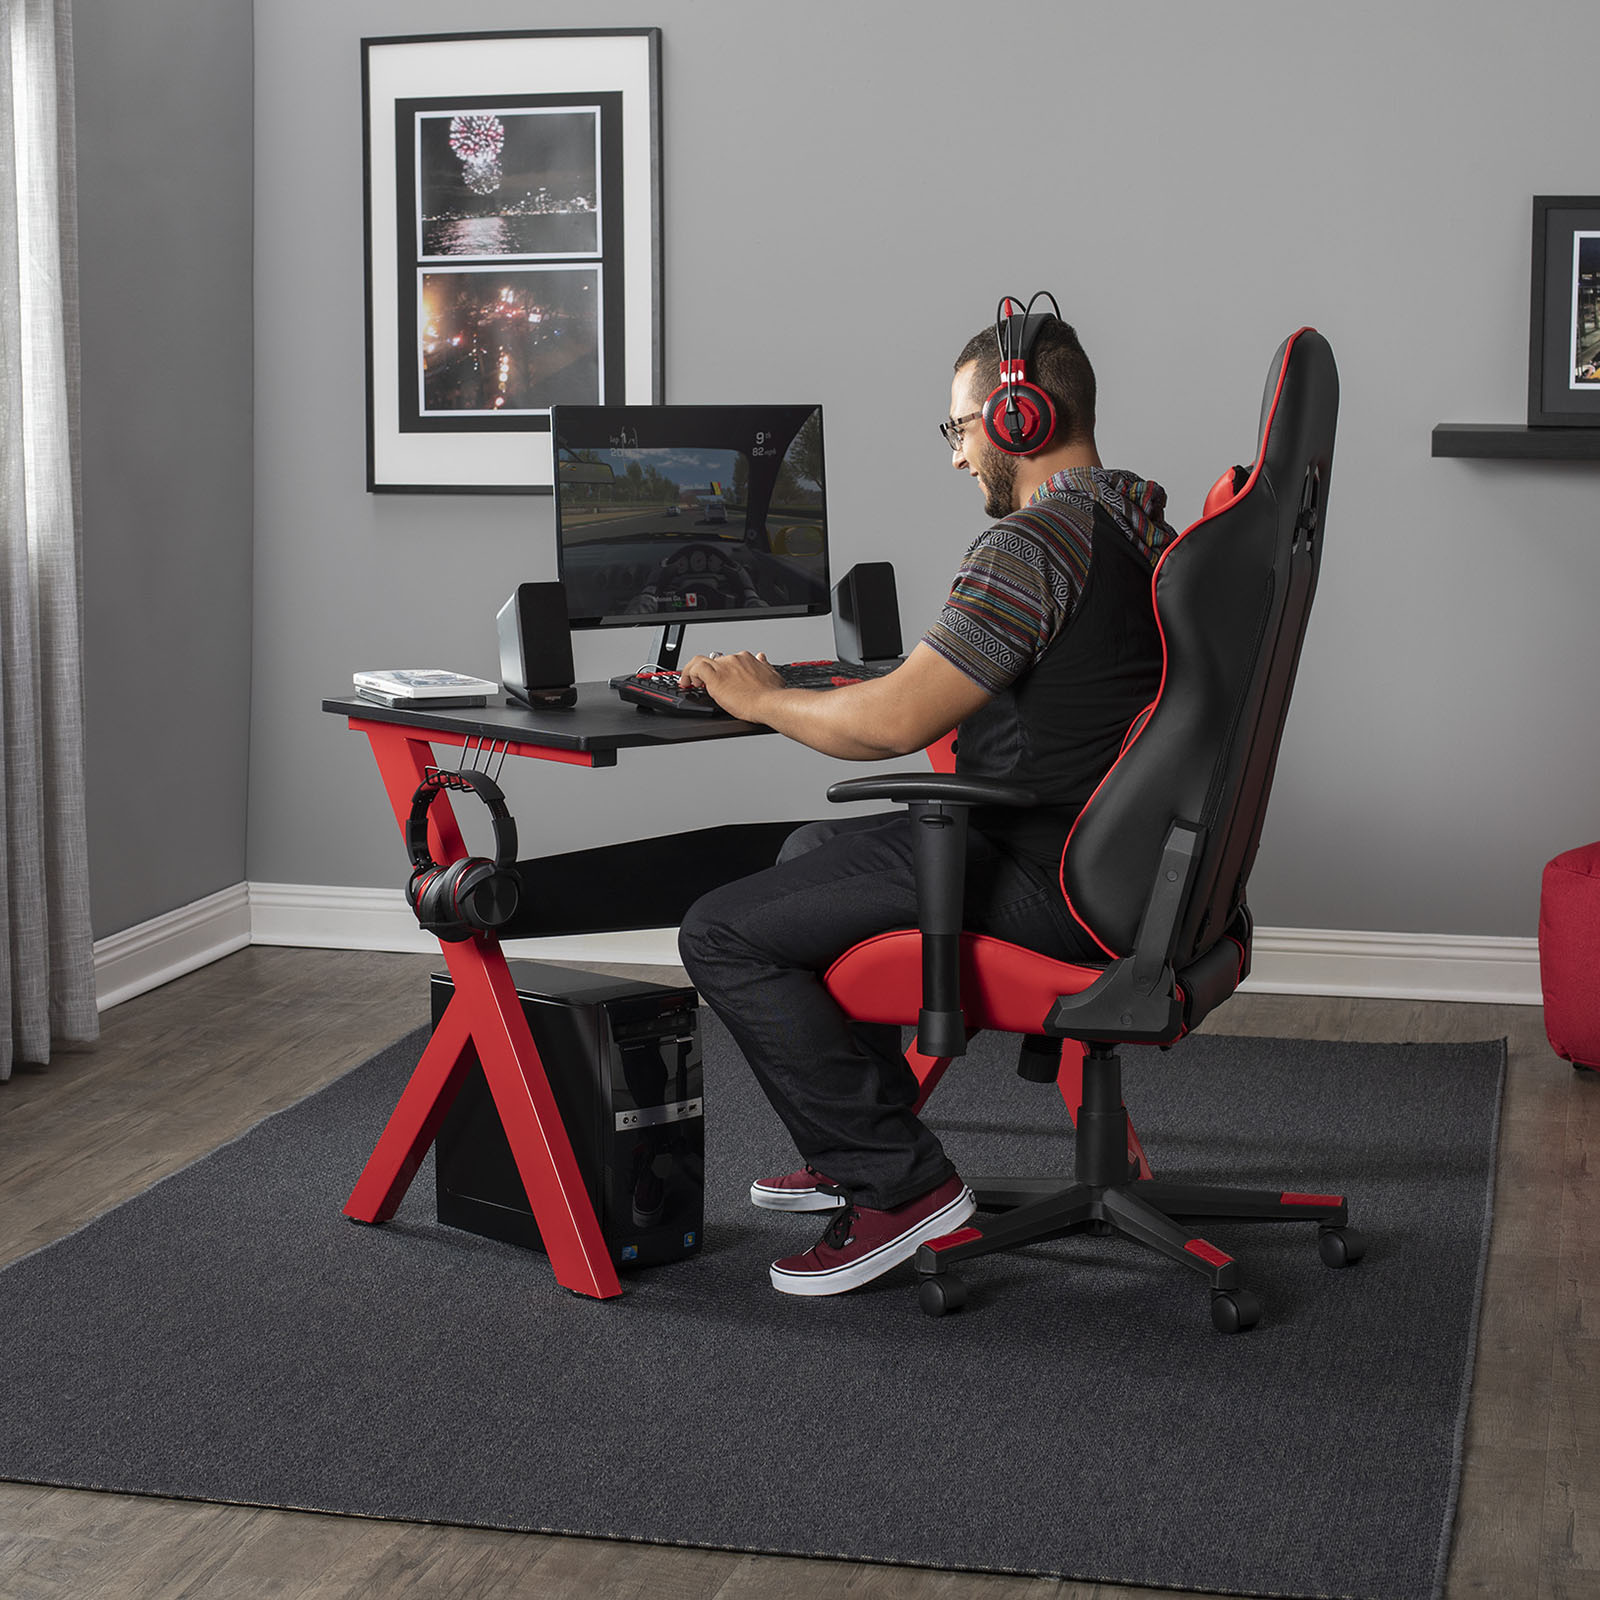 SD STUDIO DESIGNS Overlord Gaming Table Black,red